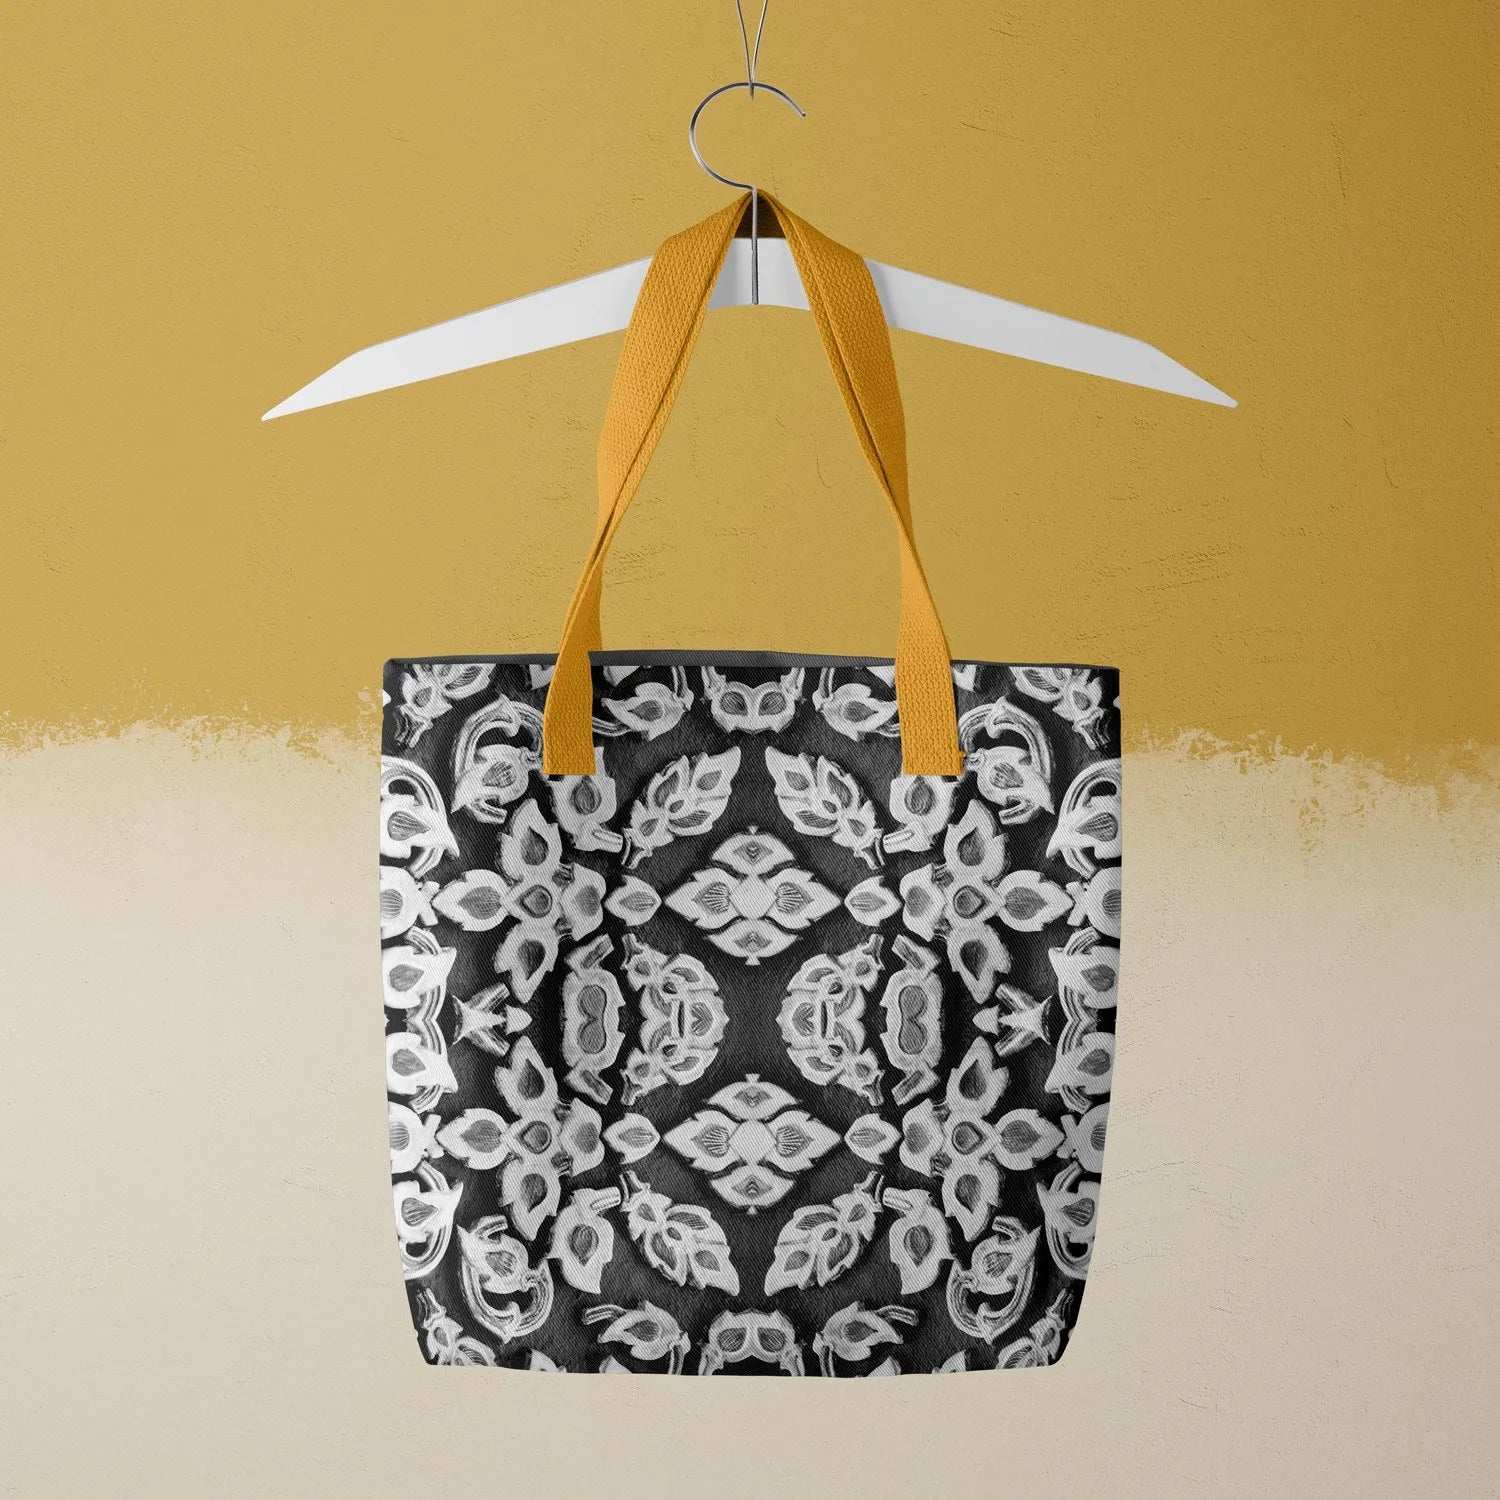 Ayodhya Tote - Black And White - Heavy Duty Reusable Grocery Bag - Yellow Handles - Shopping Totes - Aesthetic Art